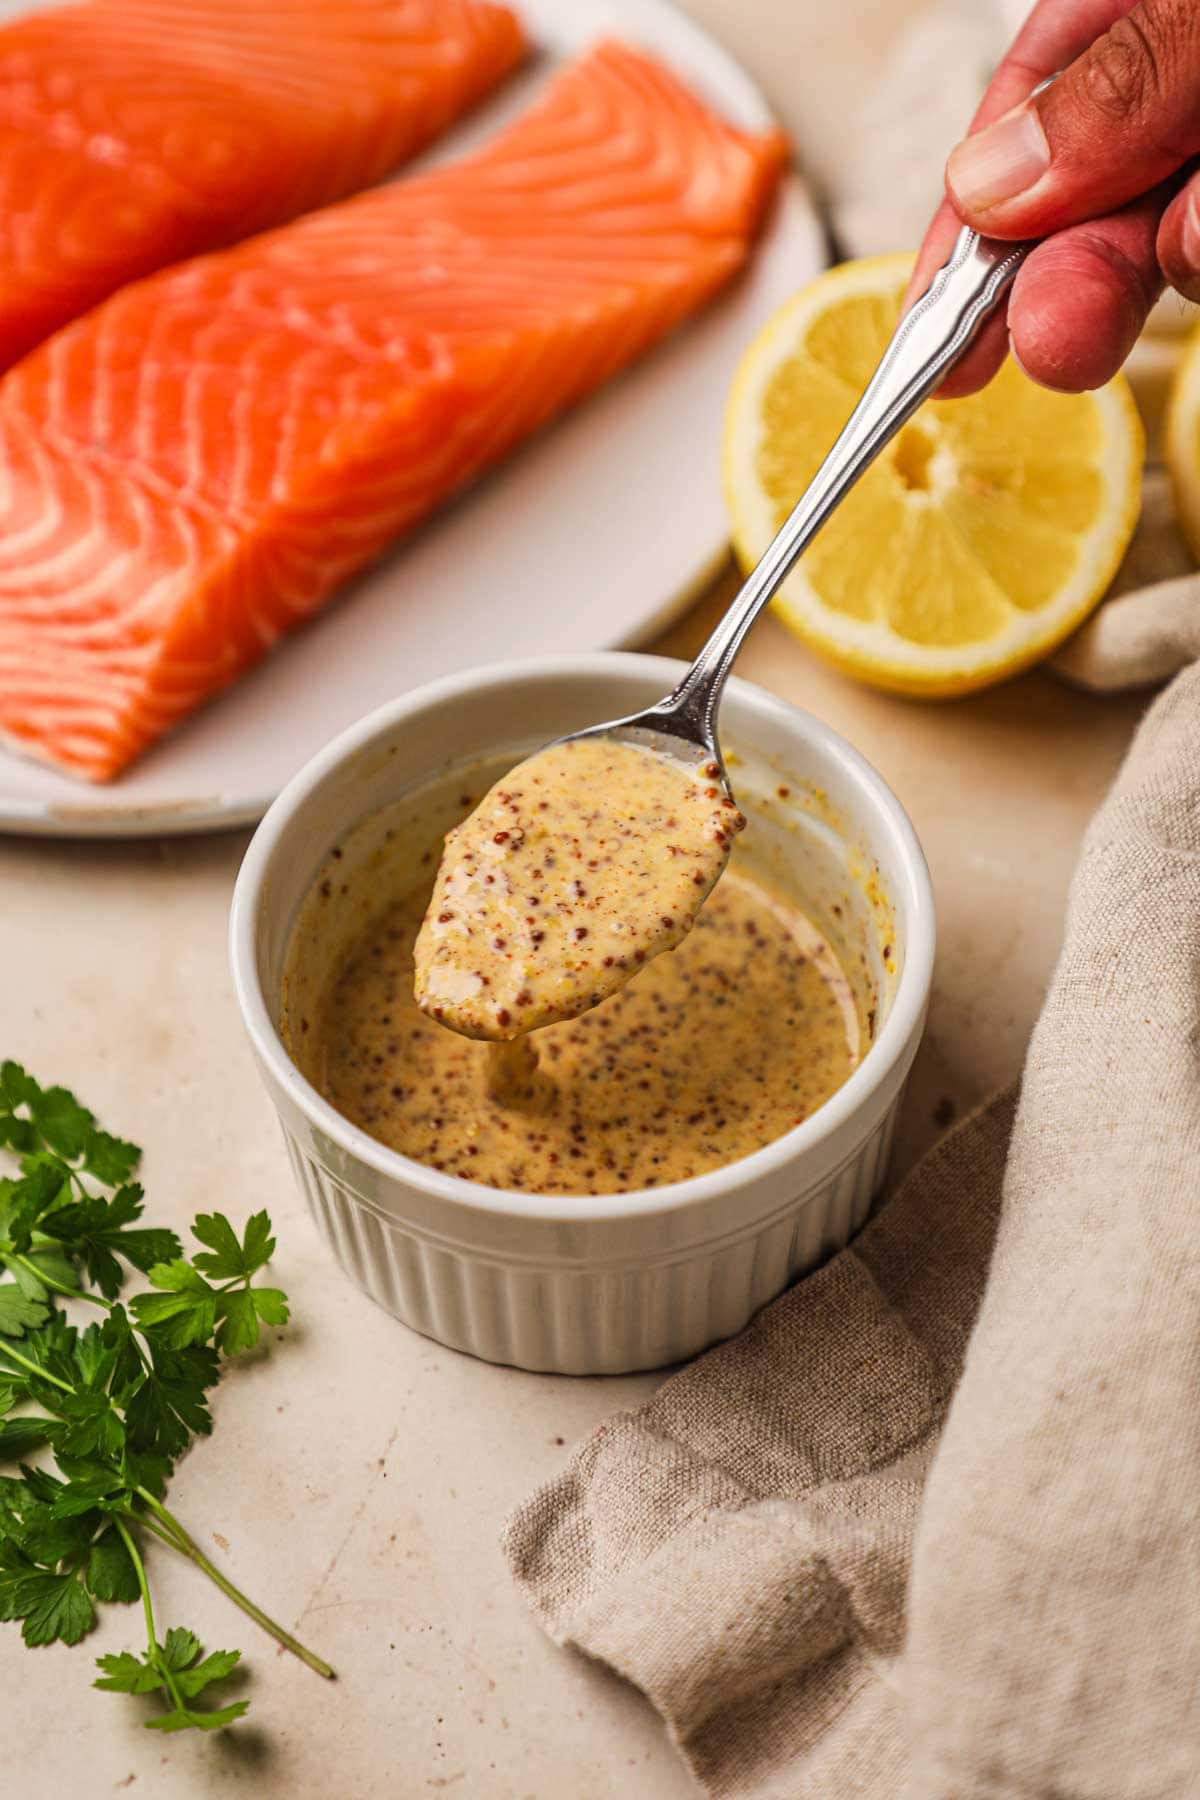 Honey garlic dijonnaise made with whole grain mustard in a ramekin for sandwiches, chicken, fish, and more.